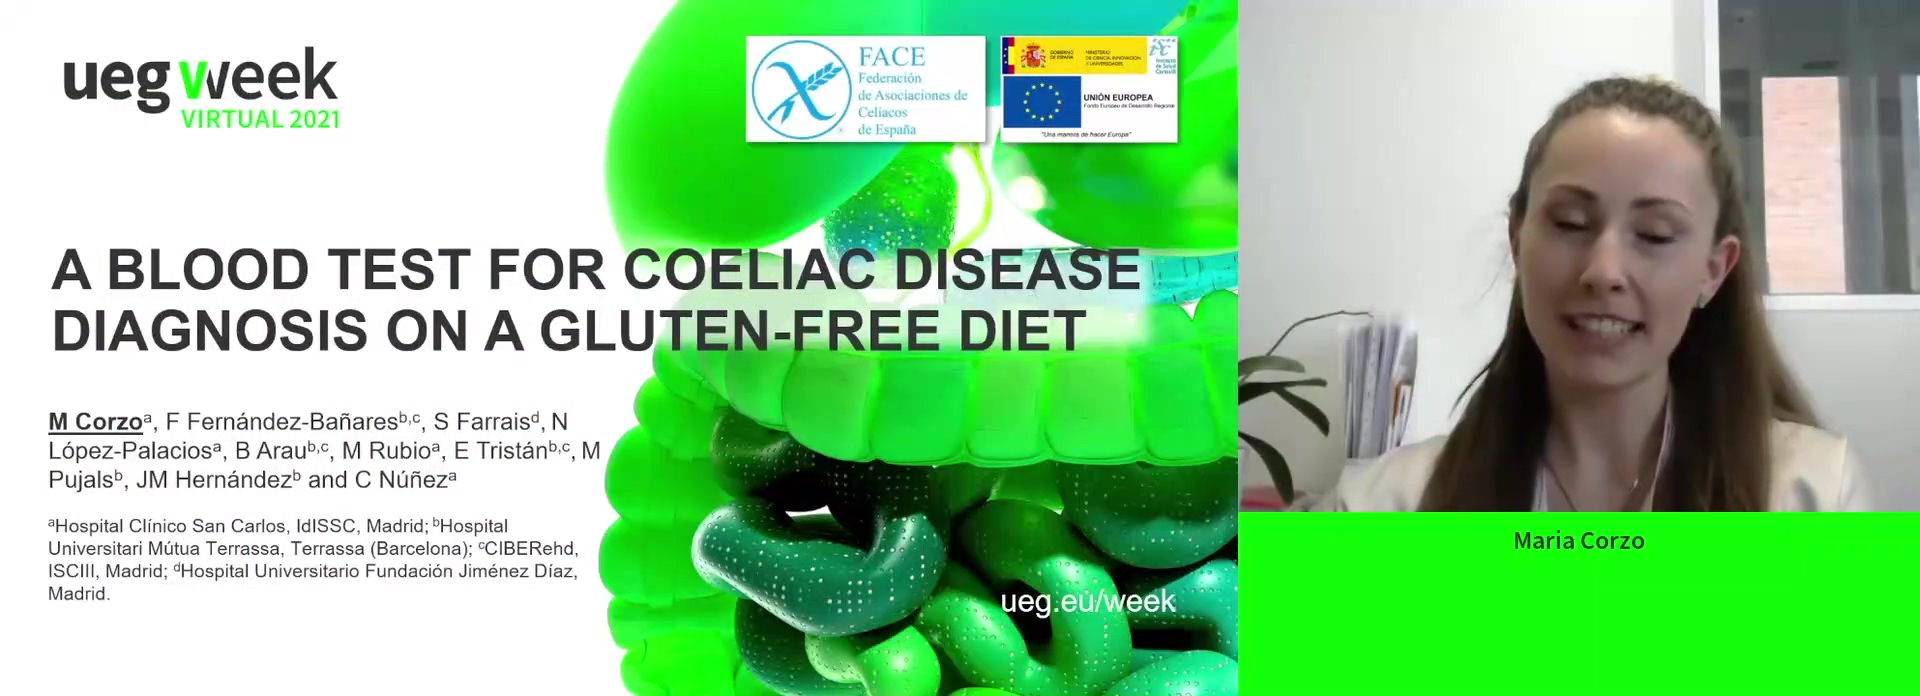 A BLOOD TEST FOR COELIAC DISEASE DIAGNOSIS ON A GLUTEN-FREE DIET